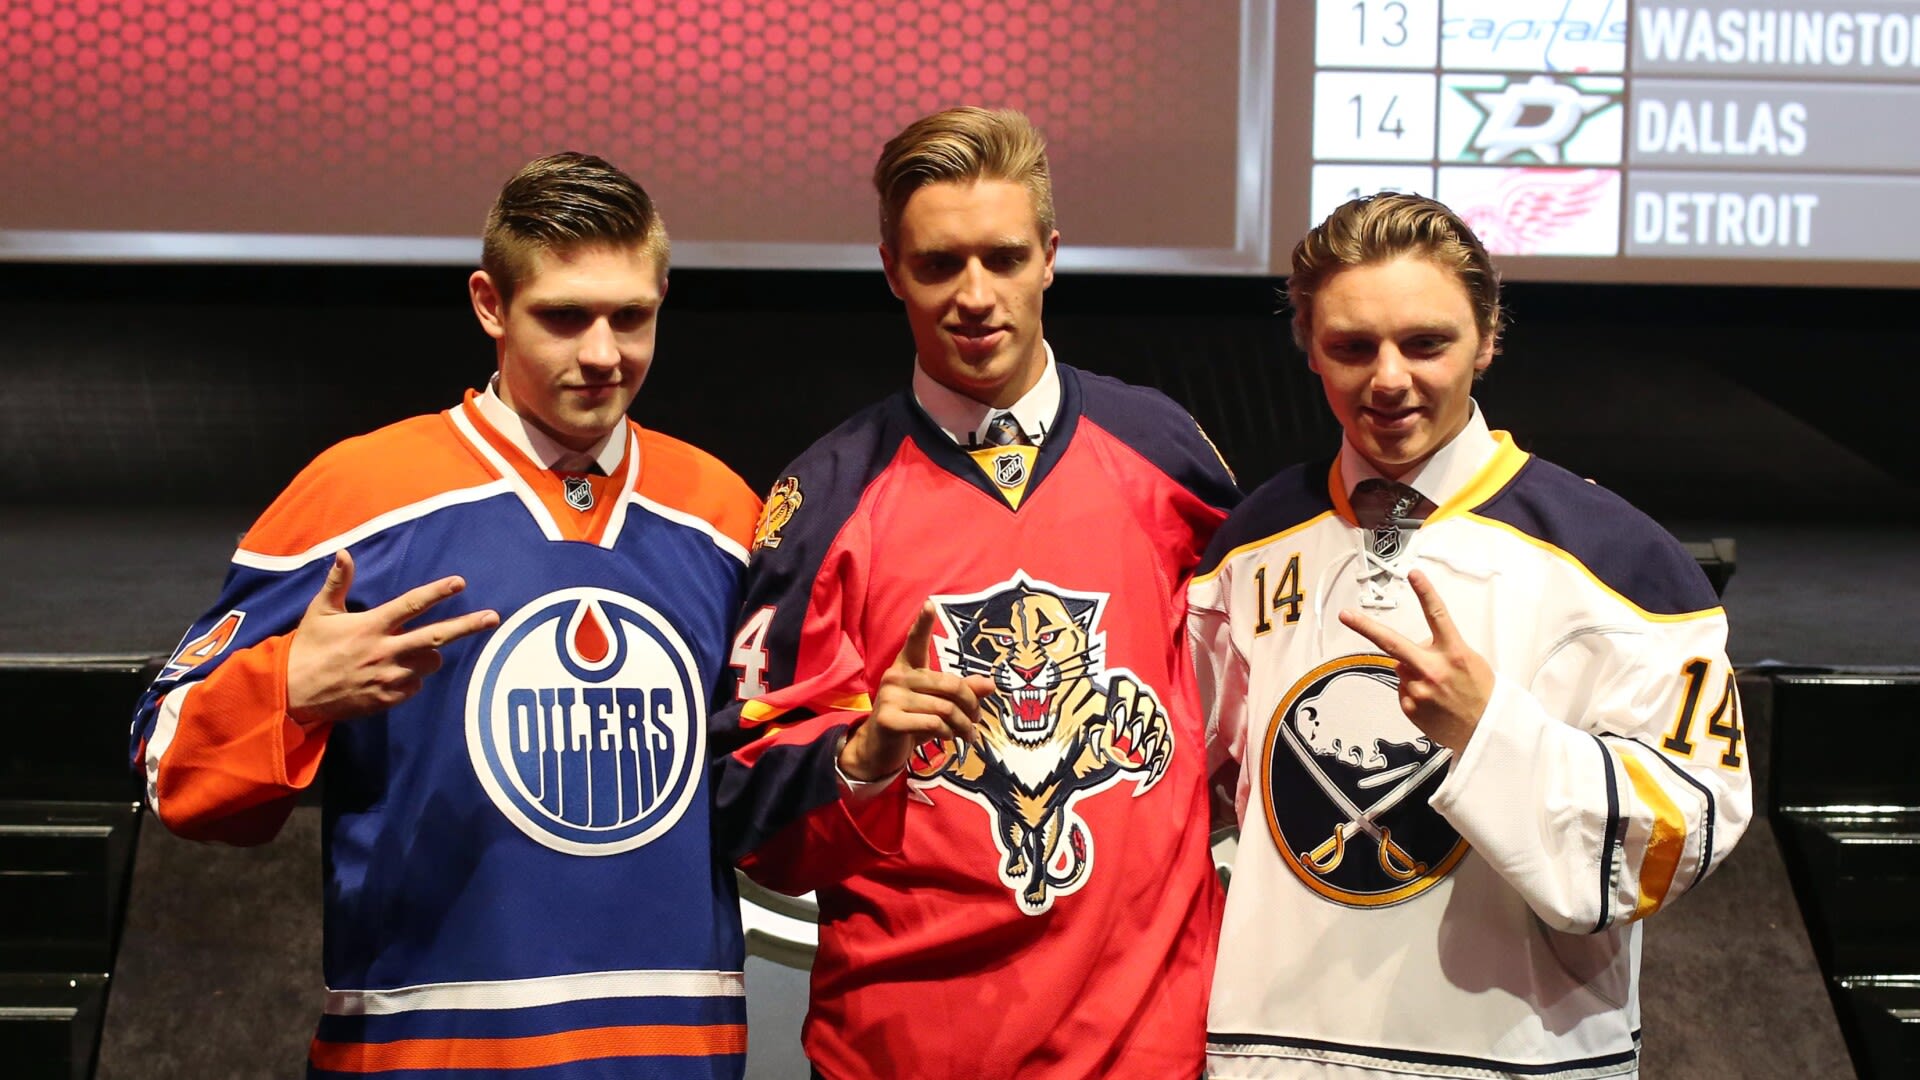 Ekblad, Reinhart, Draisaitl and Bennett were drafted together. They’ll now play for the Cup together